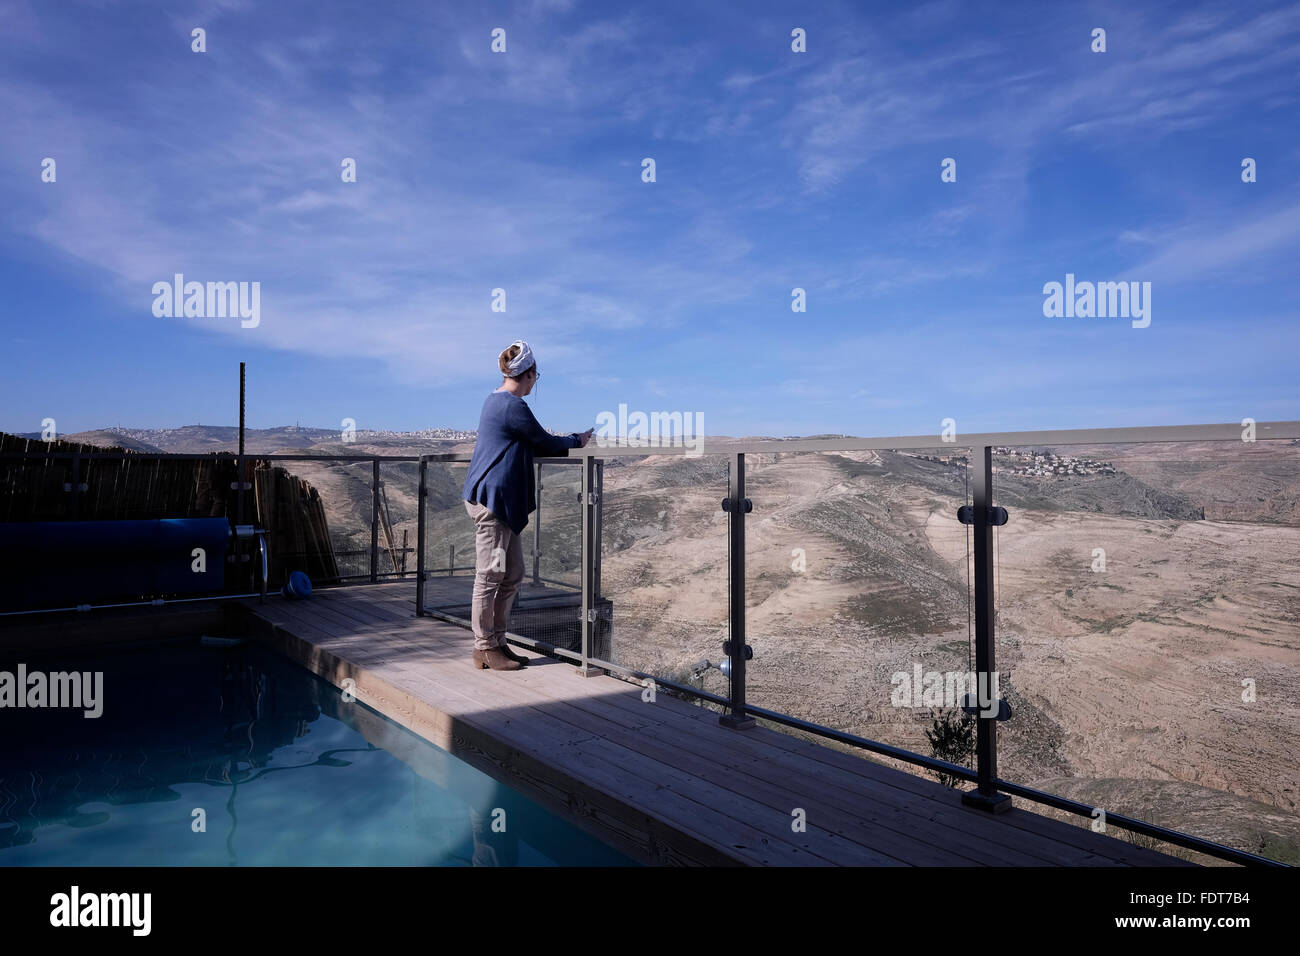 Miri Maoz Ovadia a Jewish settler from Mitzpe Nof settlement gazing at the Judean hills from the swimming pool of Nof Canaan B&B in Nofei Prat Jewish settlement in the West Bank Israel on 01 February 2016. The Palestinian Authority has asked Airbnb to remove Israeli listings in West Bank settlements from its site. The Palestinians are complaining that by contributing to the economy in Judea and Samaria, Airbnb, like other companies doing business there, helps perpetuate Israel’s 'settlement” enterprise. Stock Photo